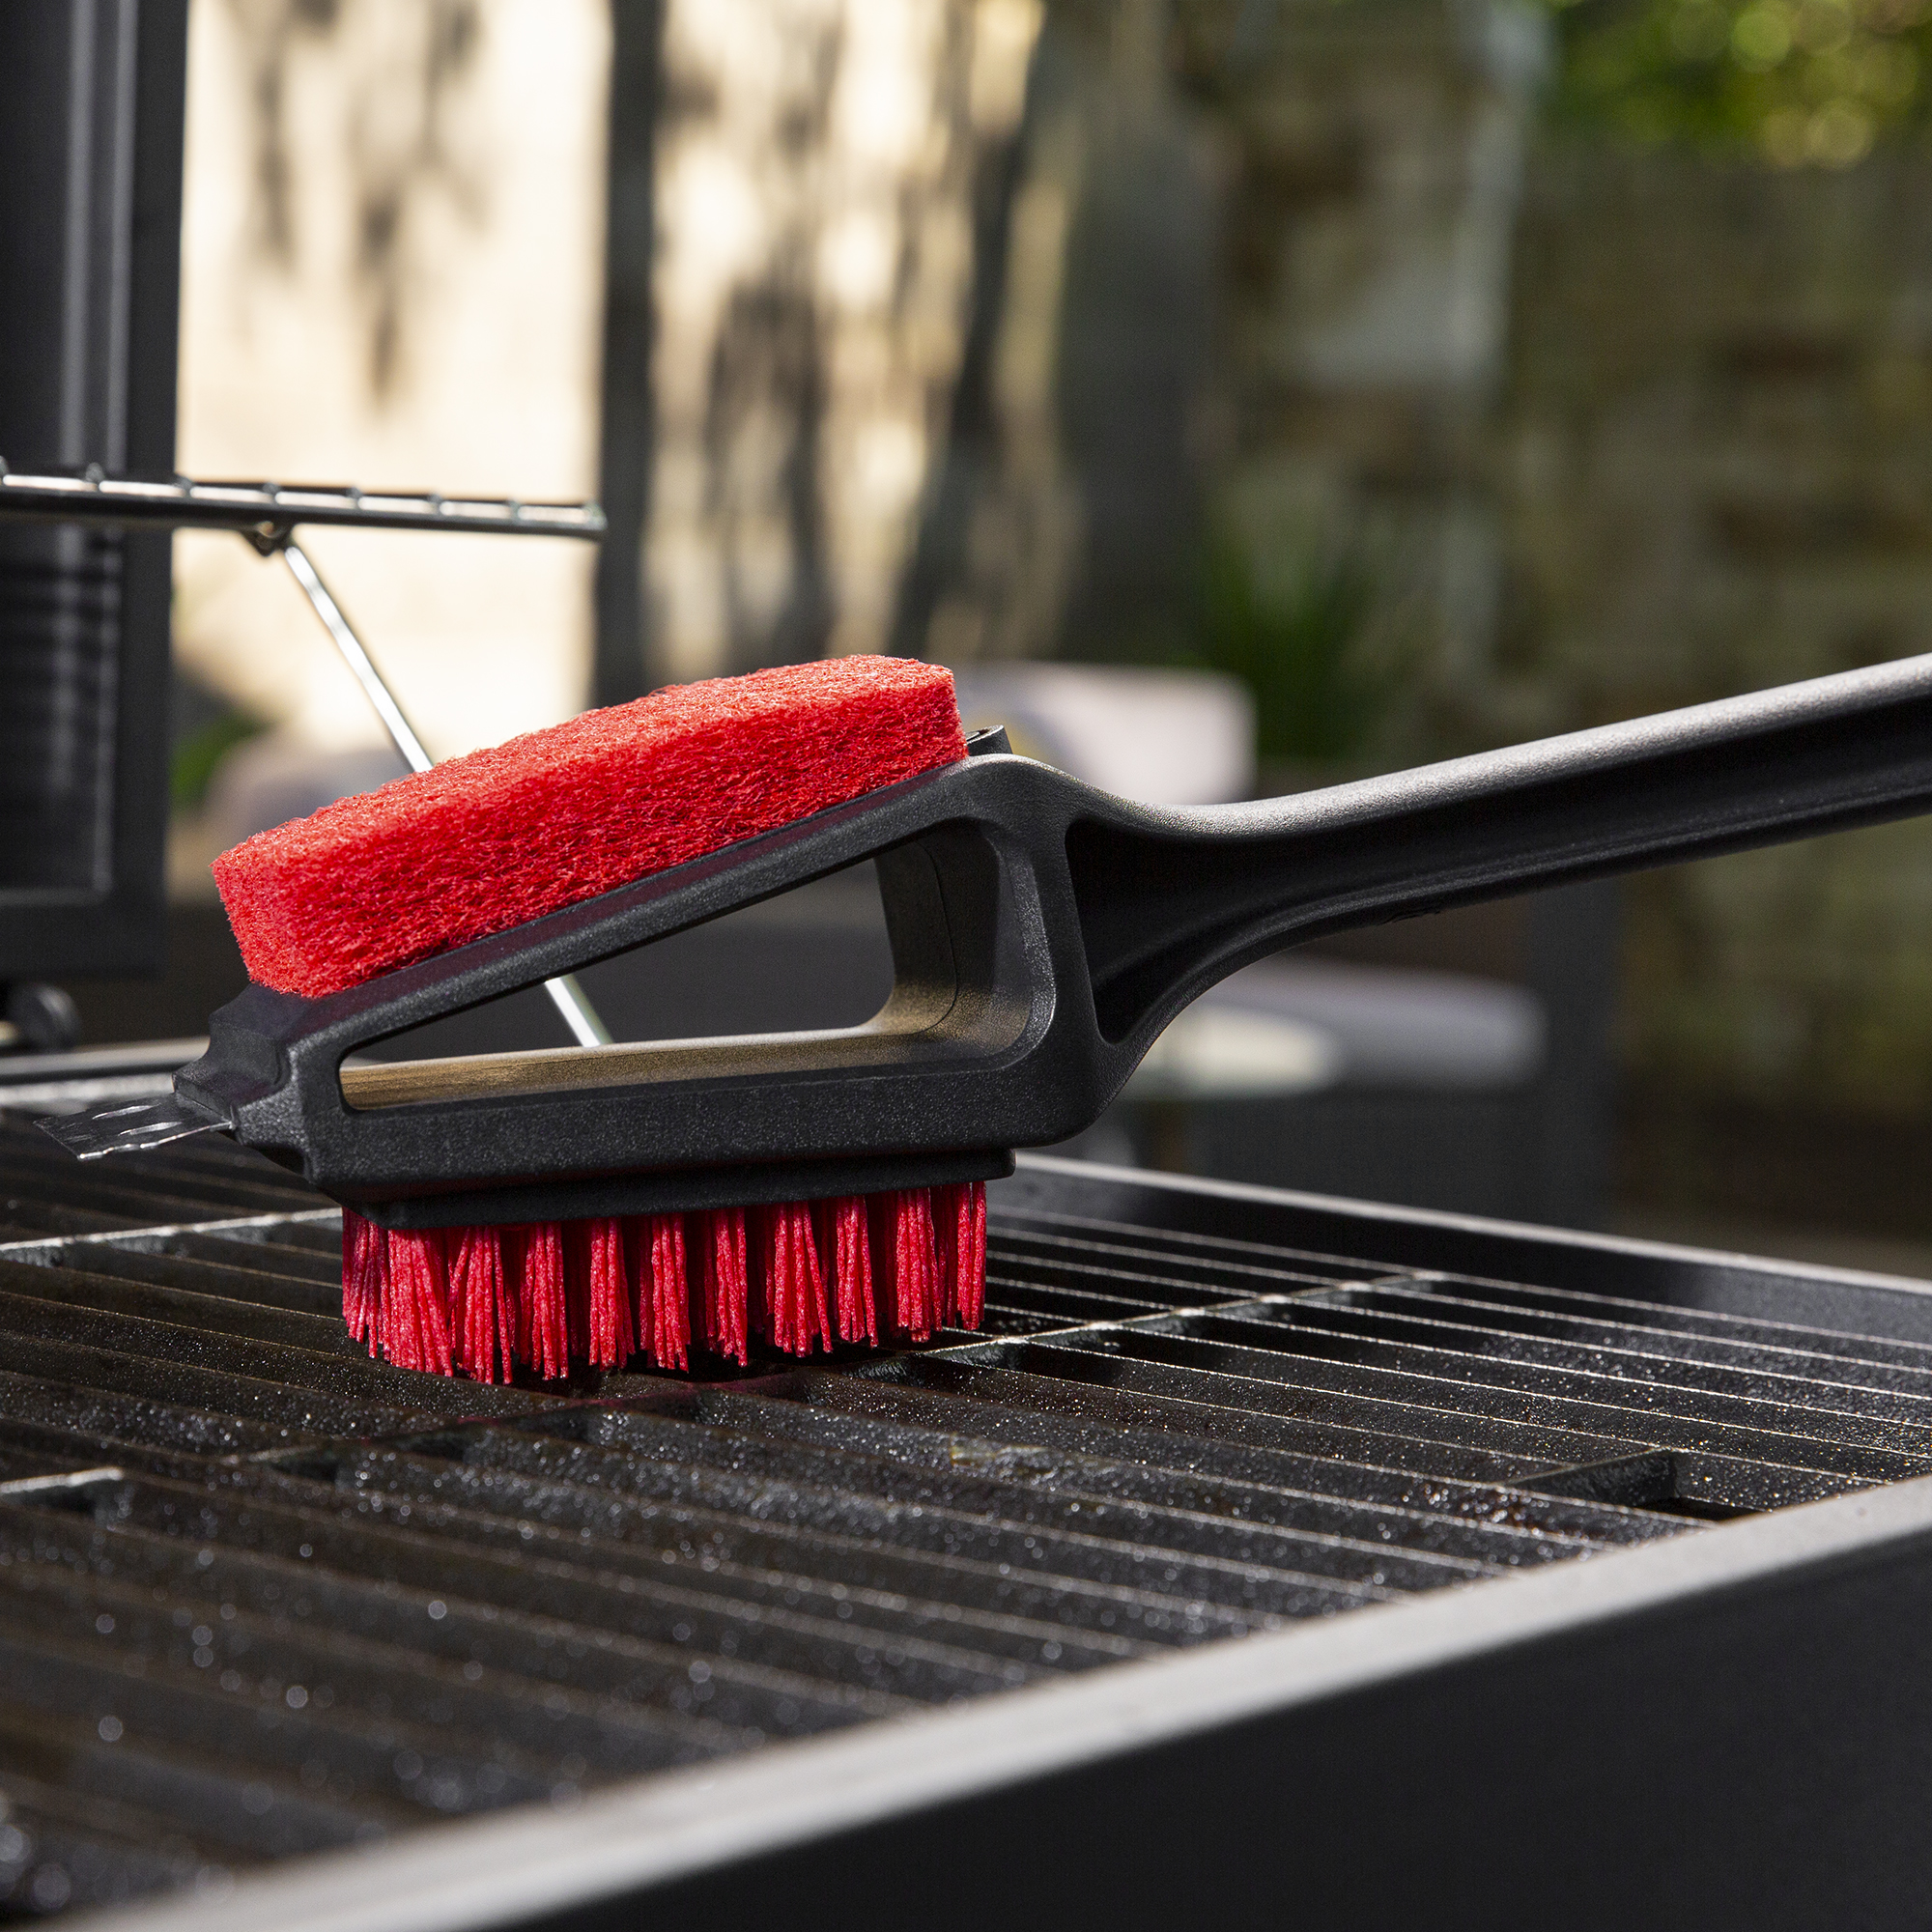 Expert Grill 3 in 1 Cleaning Cold Grill Brush with Stainless Steel Scraper - image 5 of 10